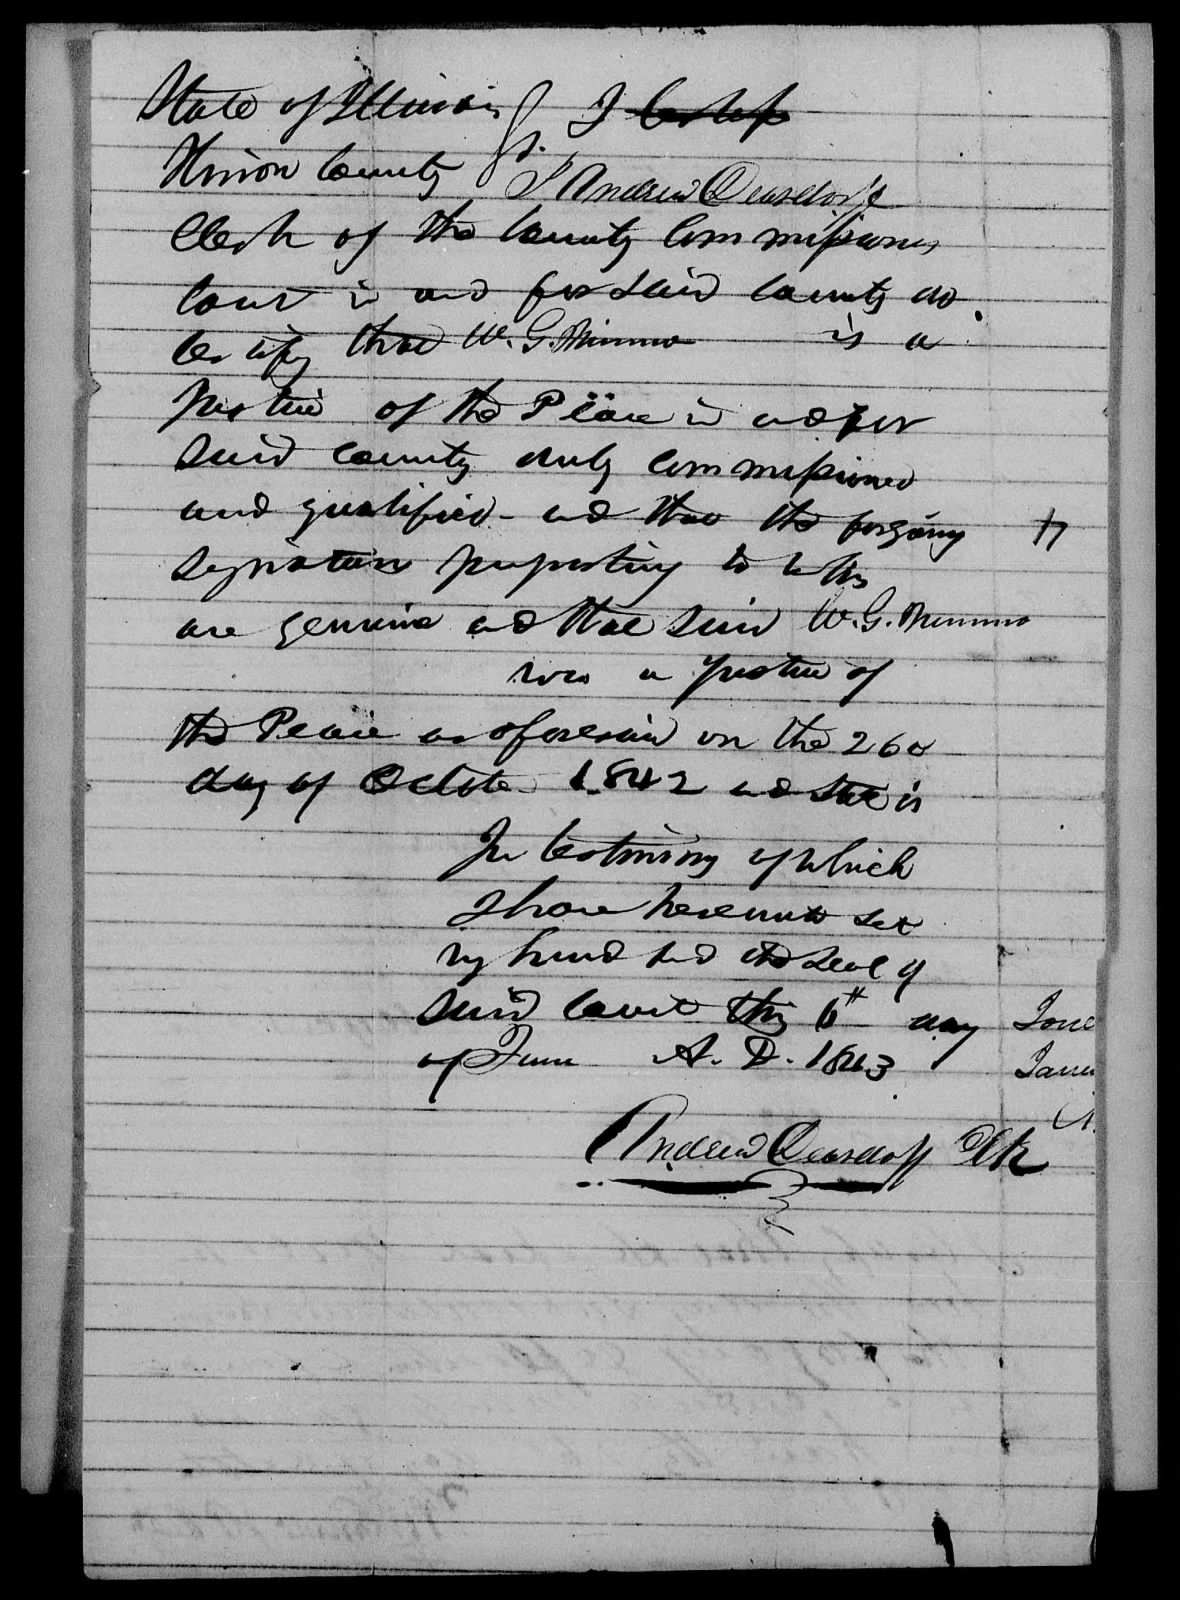 Affidavit of Hezekiah West in support of a Pension Claim for Rosana Murray, 26 October 1842, page 2